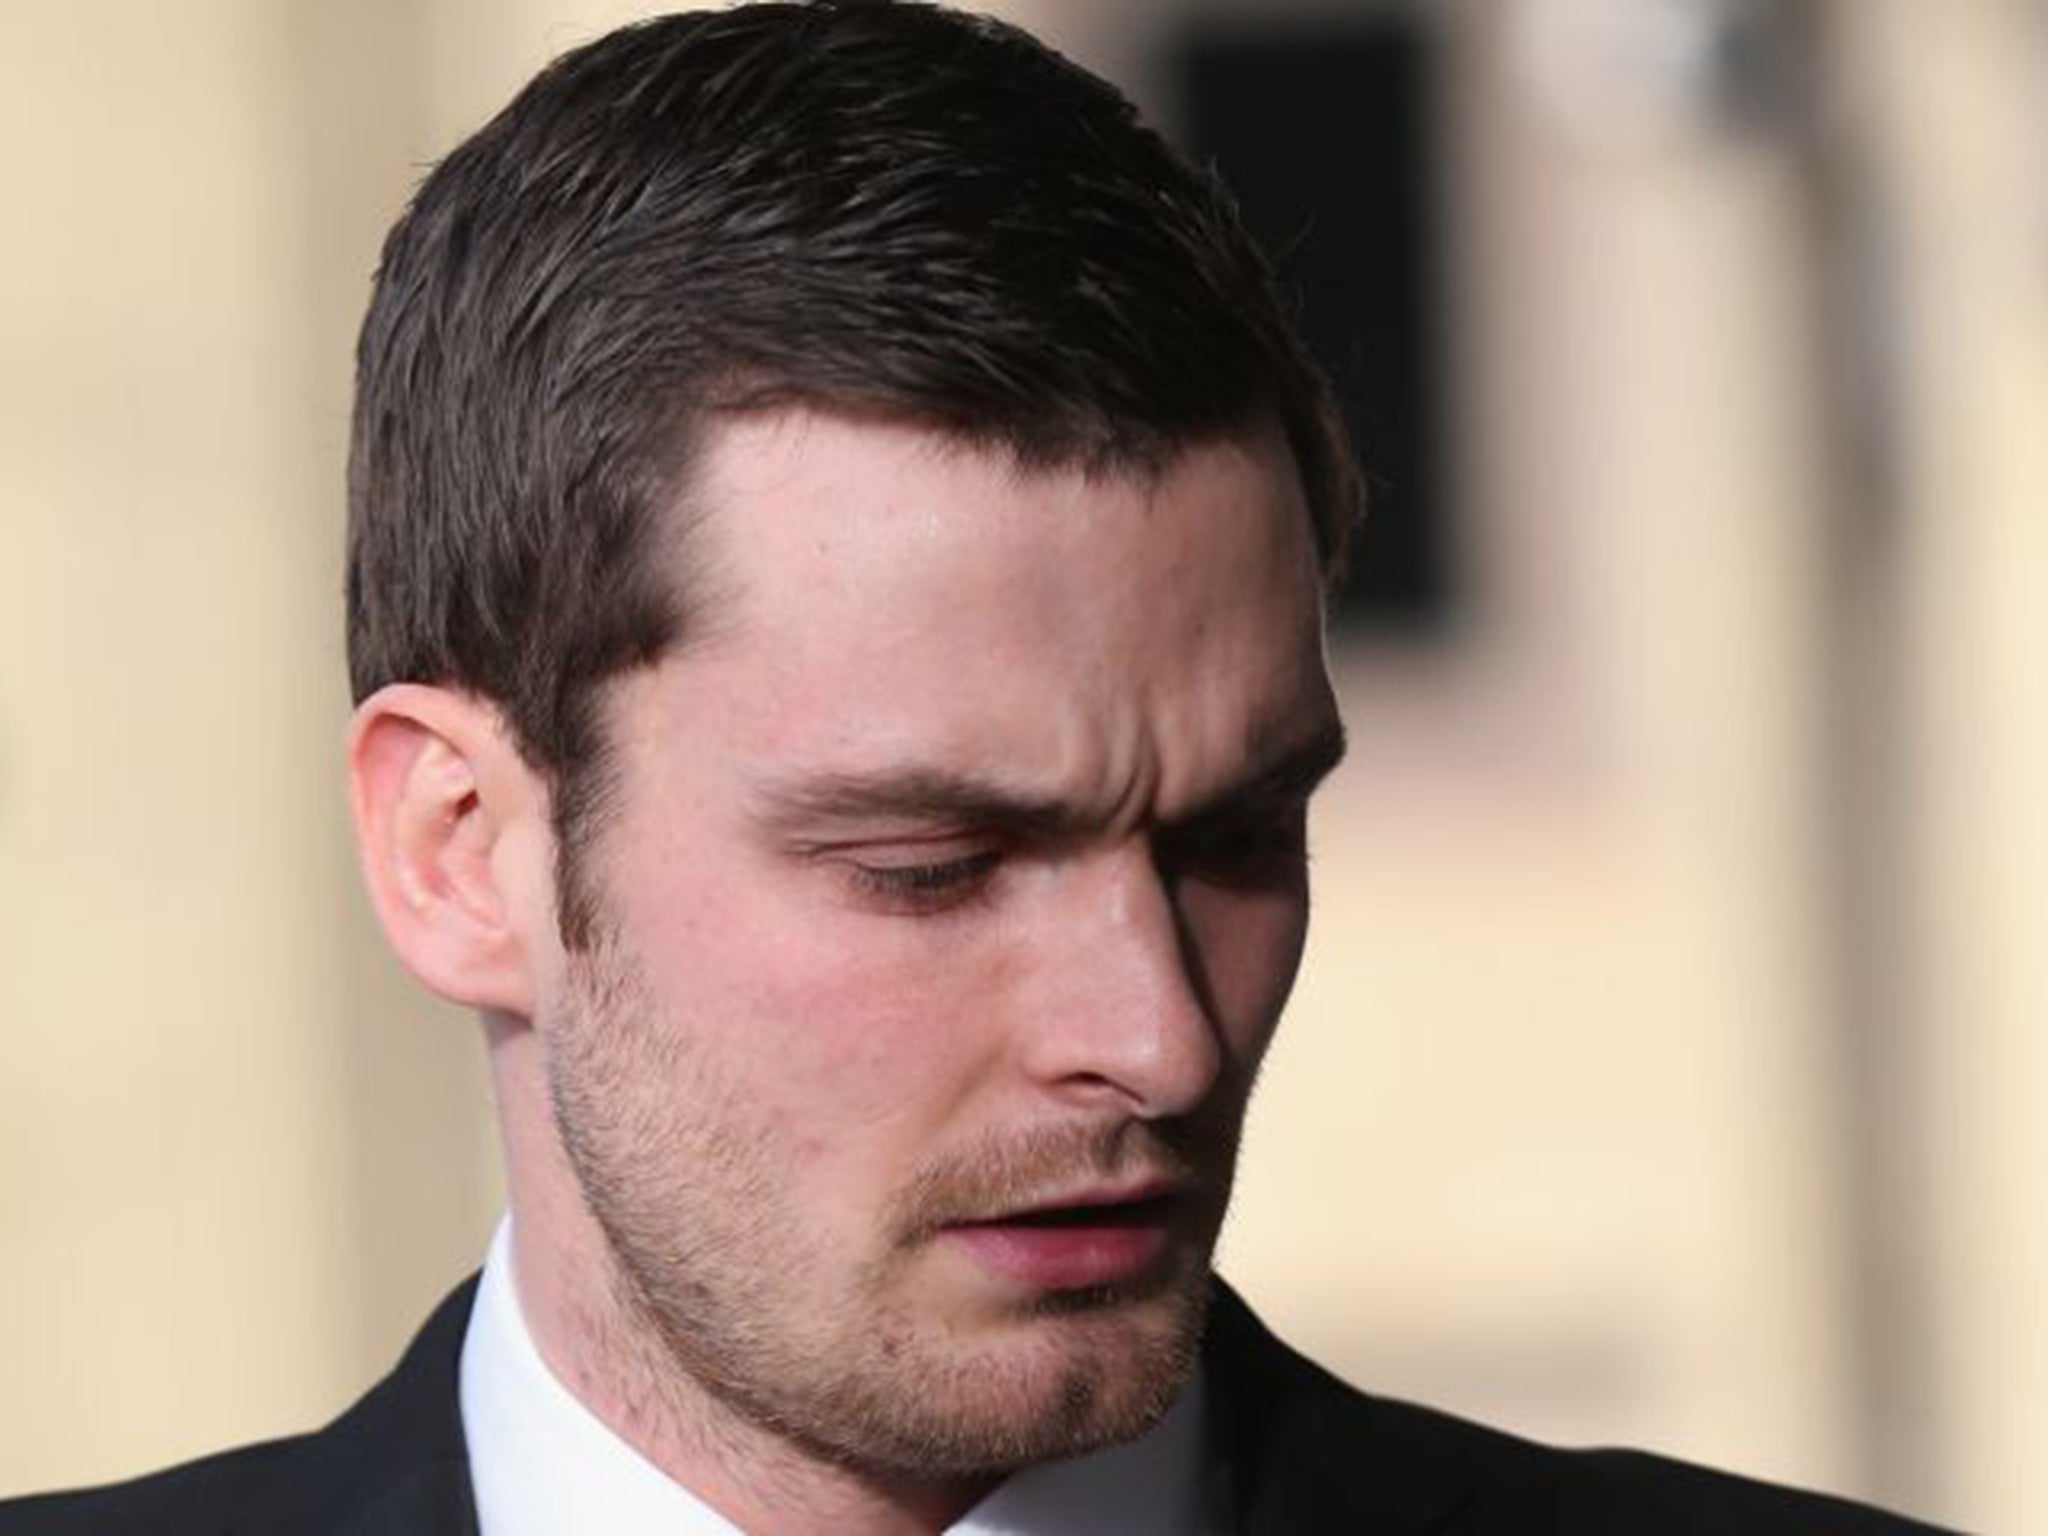 Adam Johnson pleaded guilty to two counts of sexual abuse of a 15-year-old girl